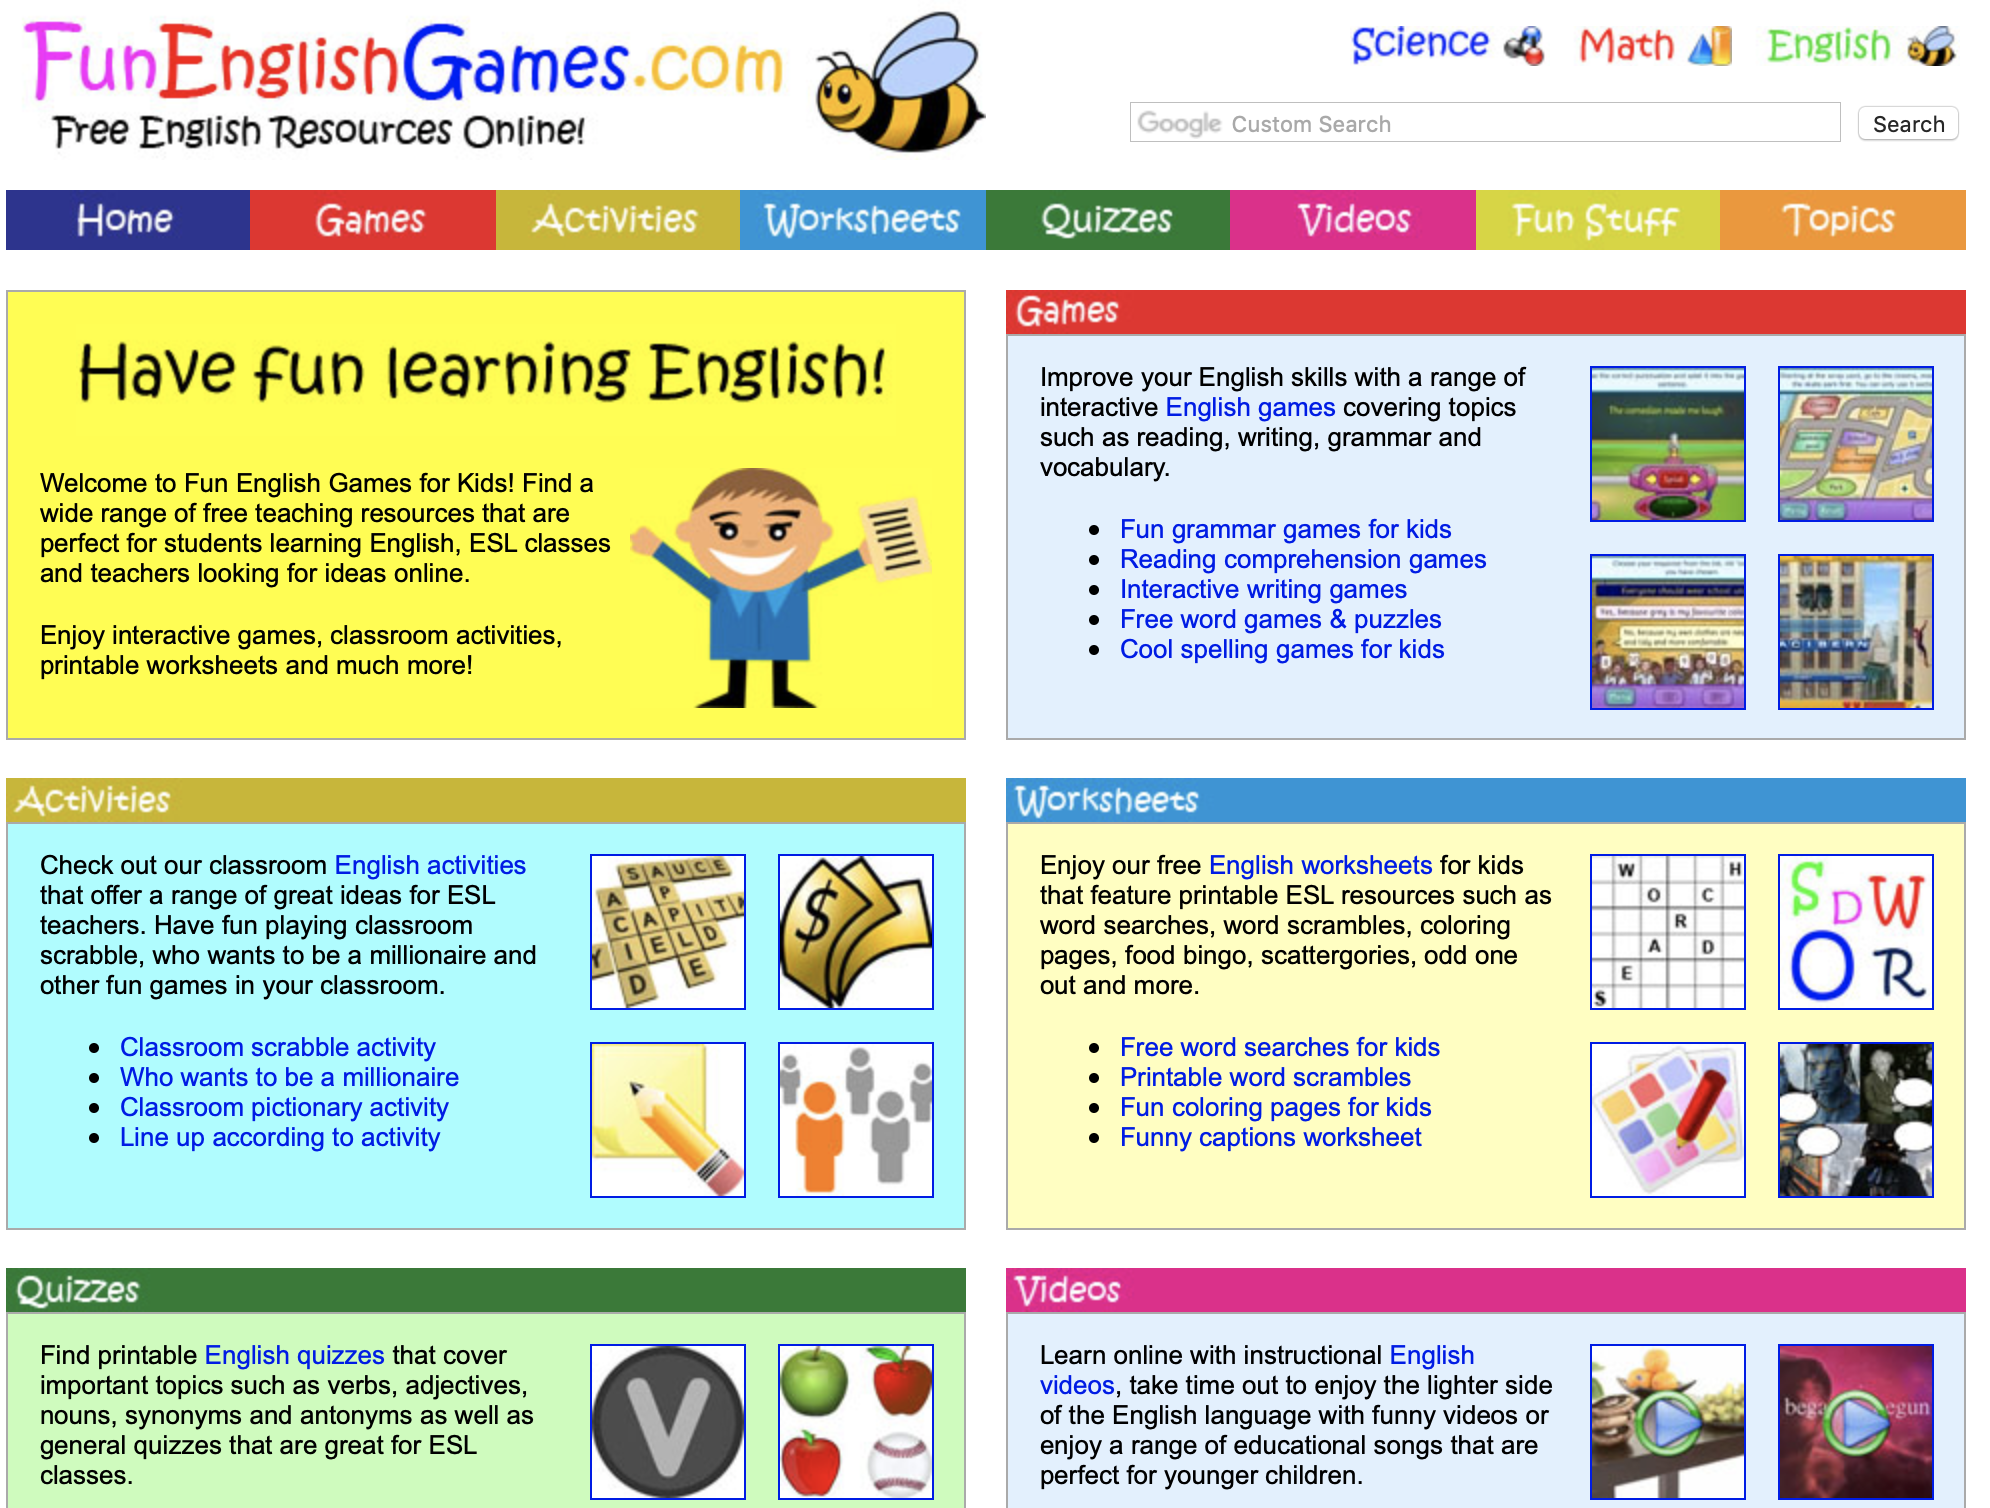 Interactive english. Funny English game. Инглиш геймс. Fun English games. English games for Kids.